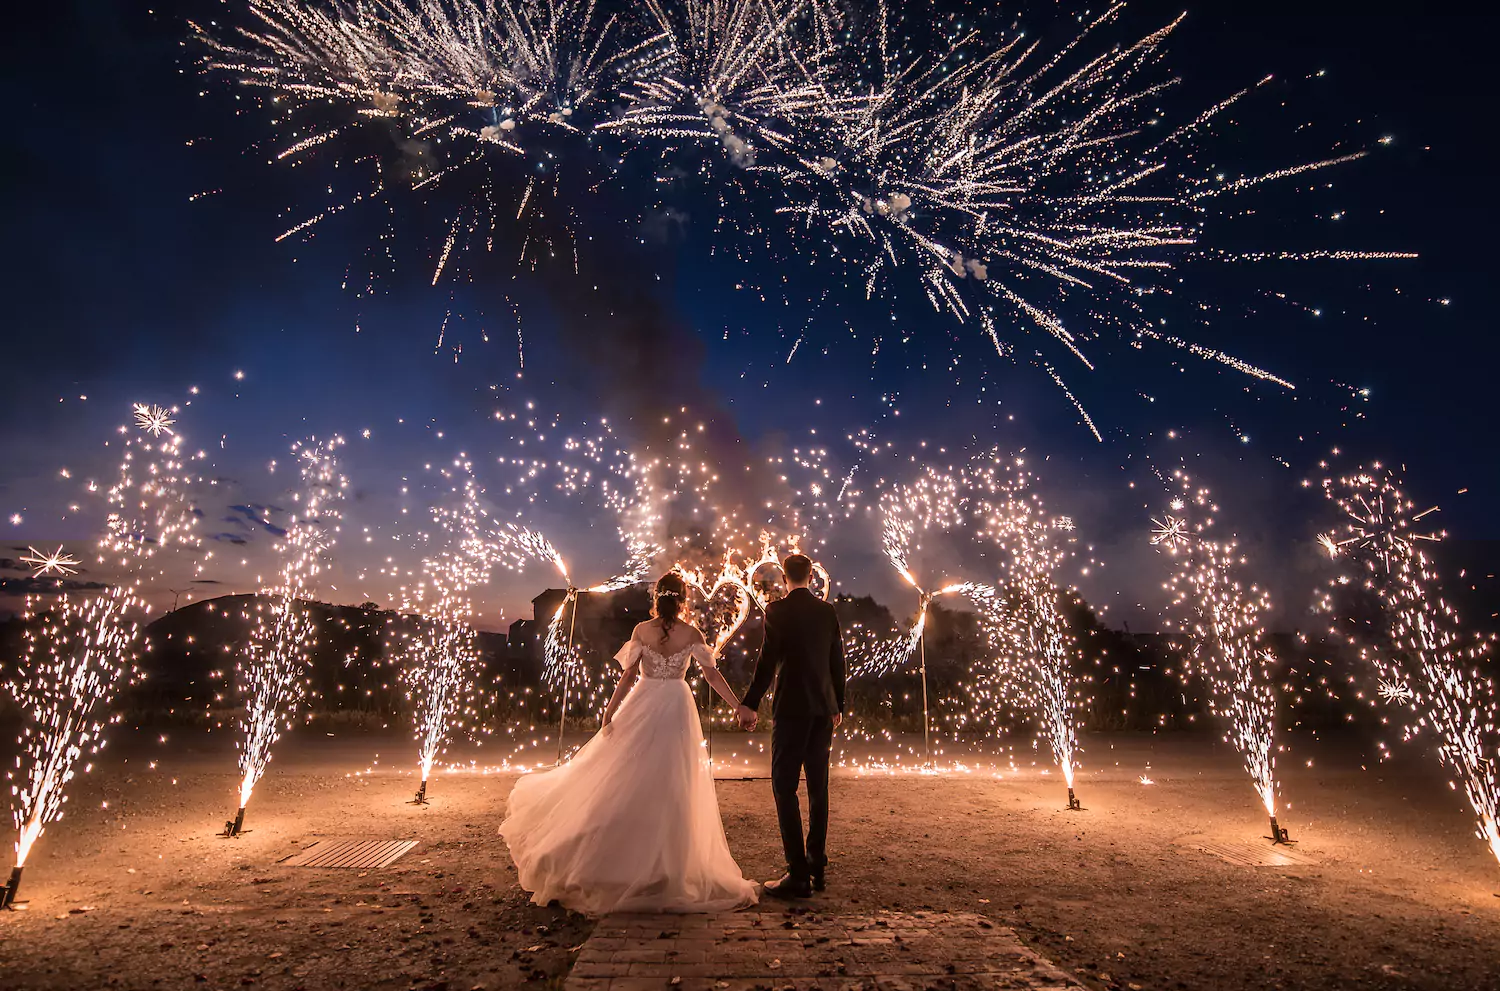 A couple who were just married stand amidst fireworks on their wedding night.